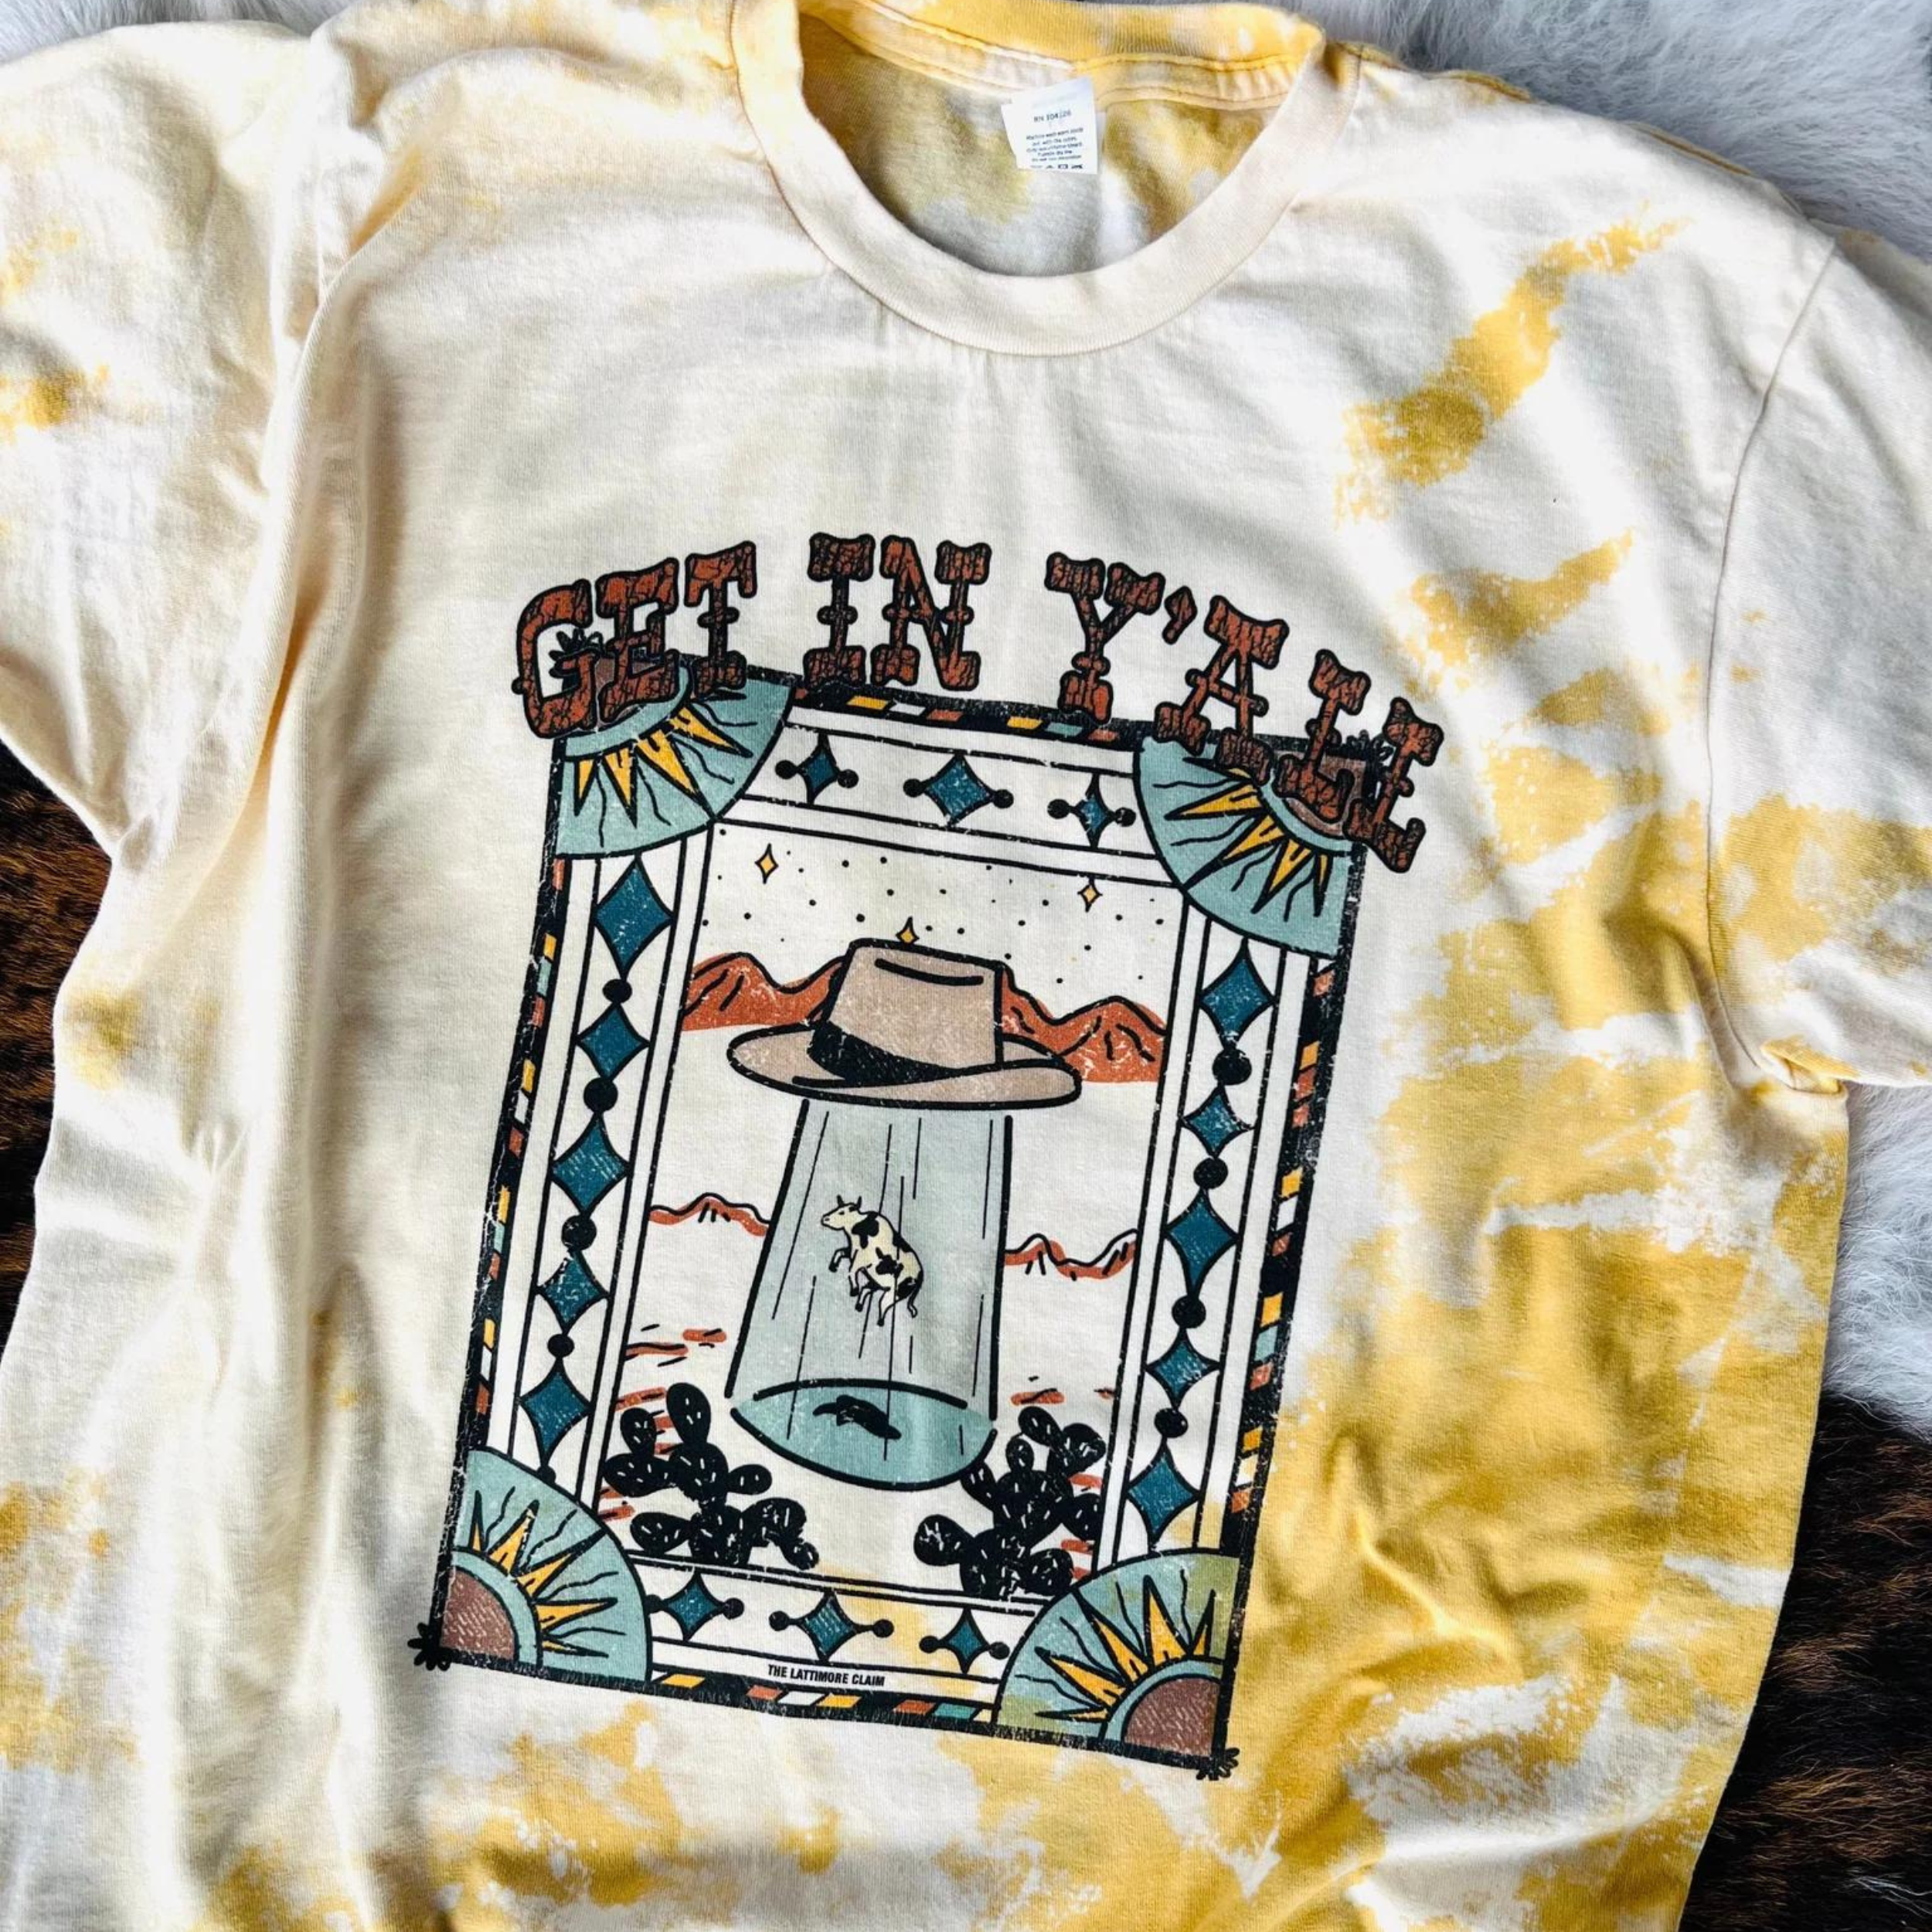 An orange short sleeve crewneck tee with a bleach splatter pattern. Featuring a graphic of a cow being abducted by a fedora in a desert. The graphic is surrounded by an artistic border of alternating colors, suns in the corners, and blue diamonds. The text "Get in yall" can be found right above the graphic in a western font. The item is pictured on a tiger print background 